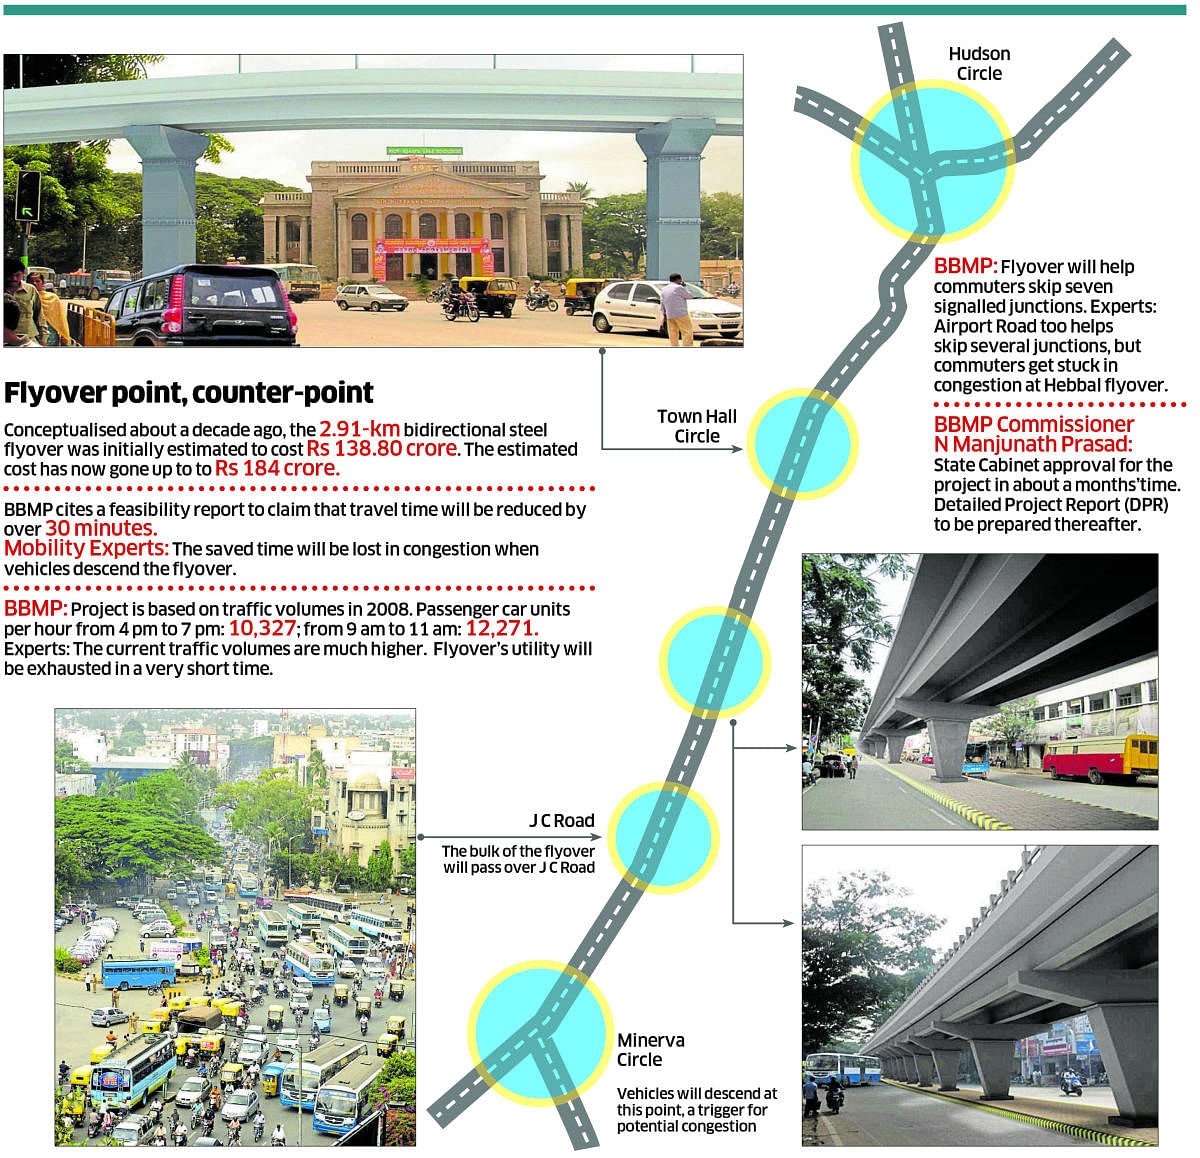 Billed as the perfect recipe for a quick transit from South to Central Bengaluru, the 2.91-km bidirectional structure is designed to connect Minerva Circle with Hudson Circle.